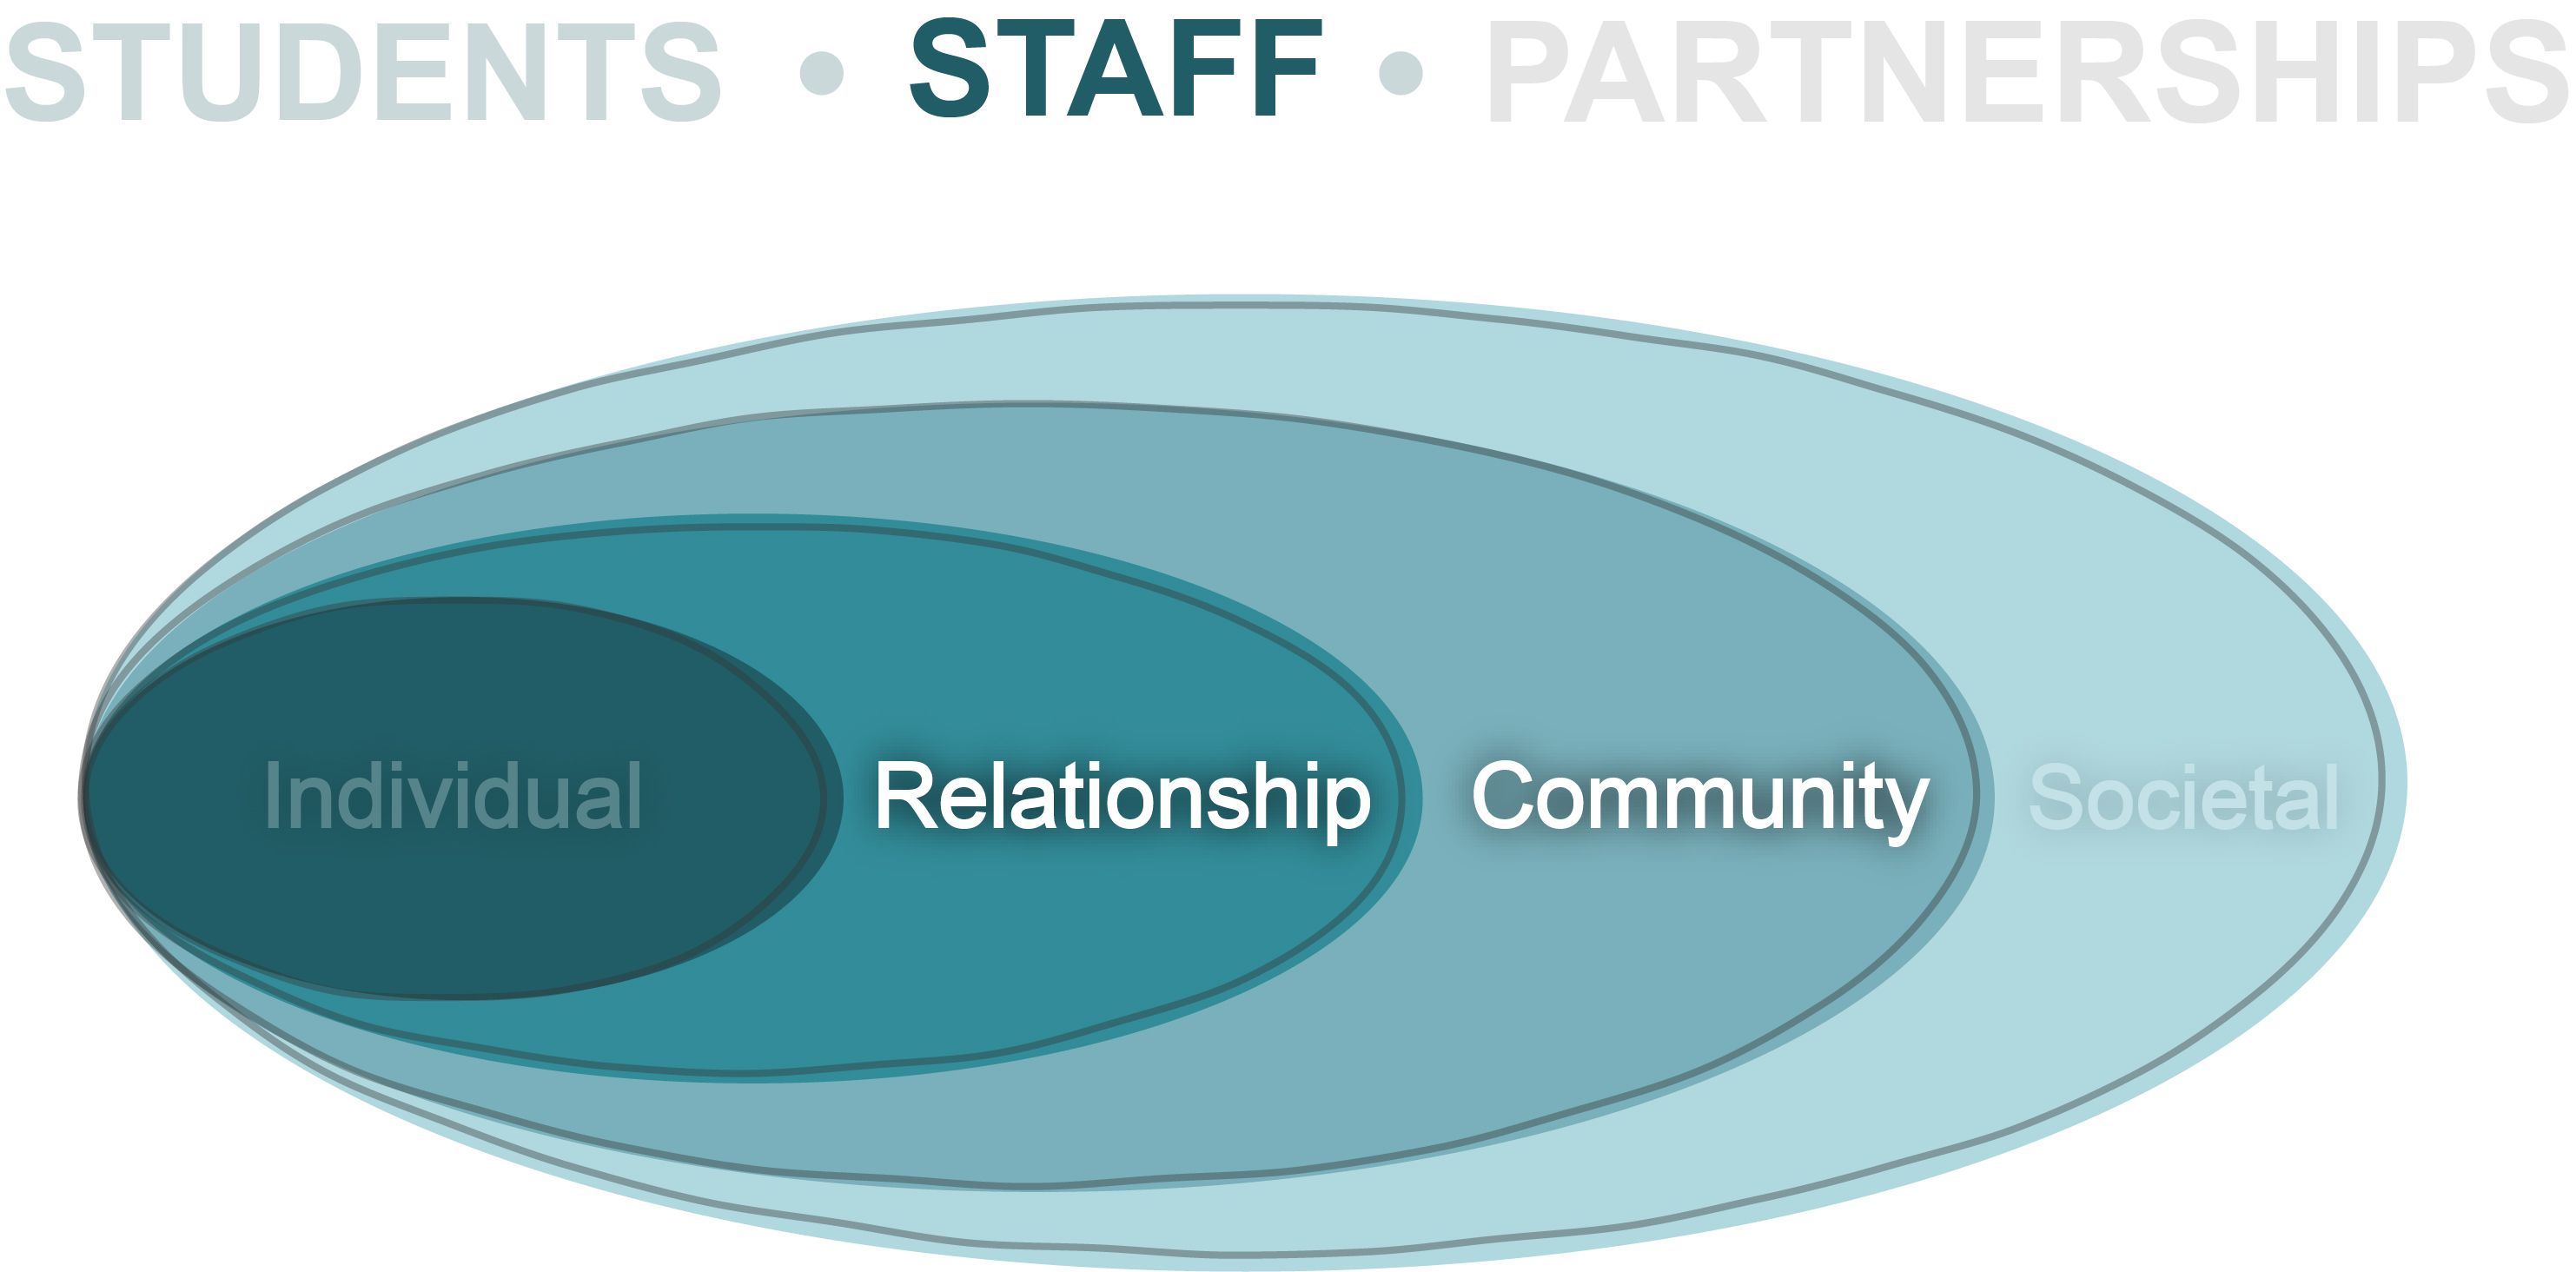 The word "Staff" and the two inner ovals "Relationship" & "Community" are highlighted in the Socioecological Model graphic.